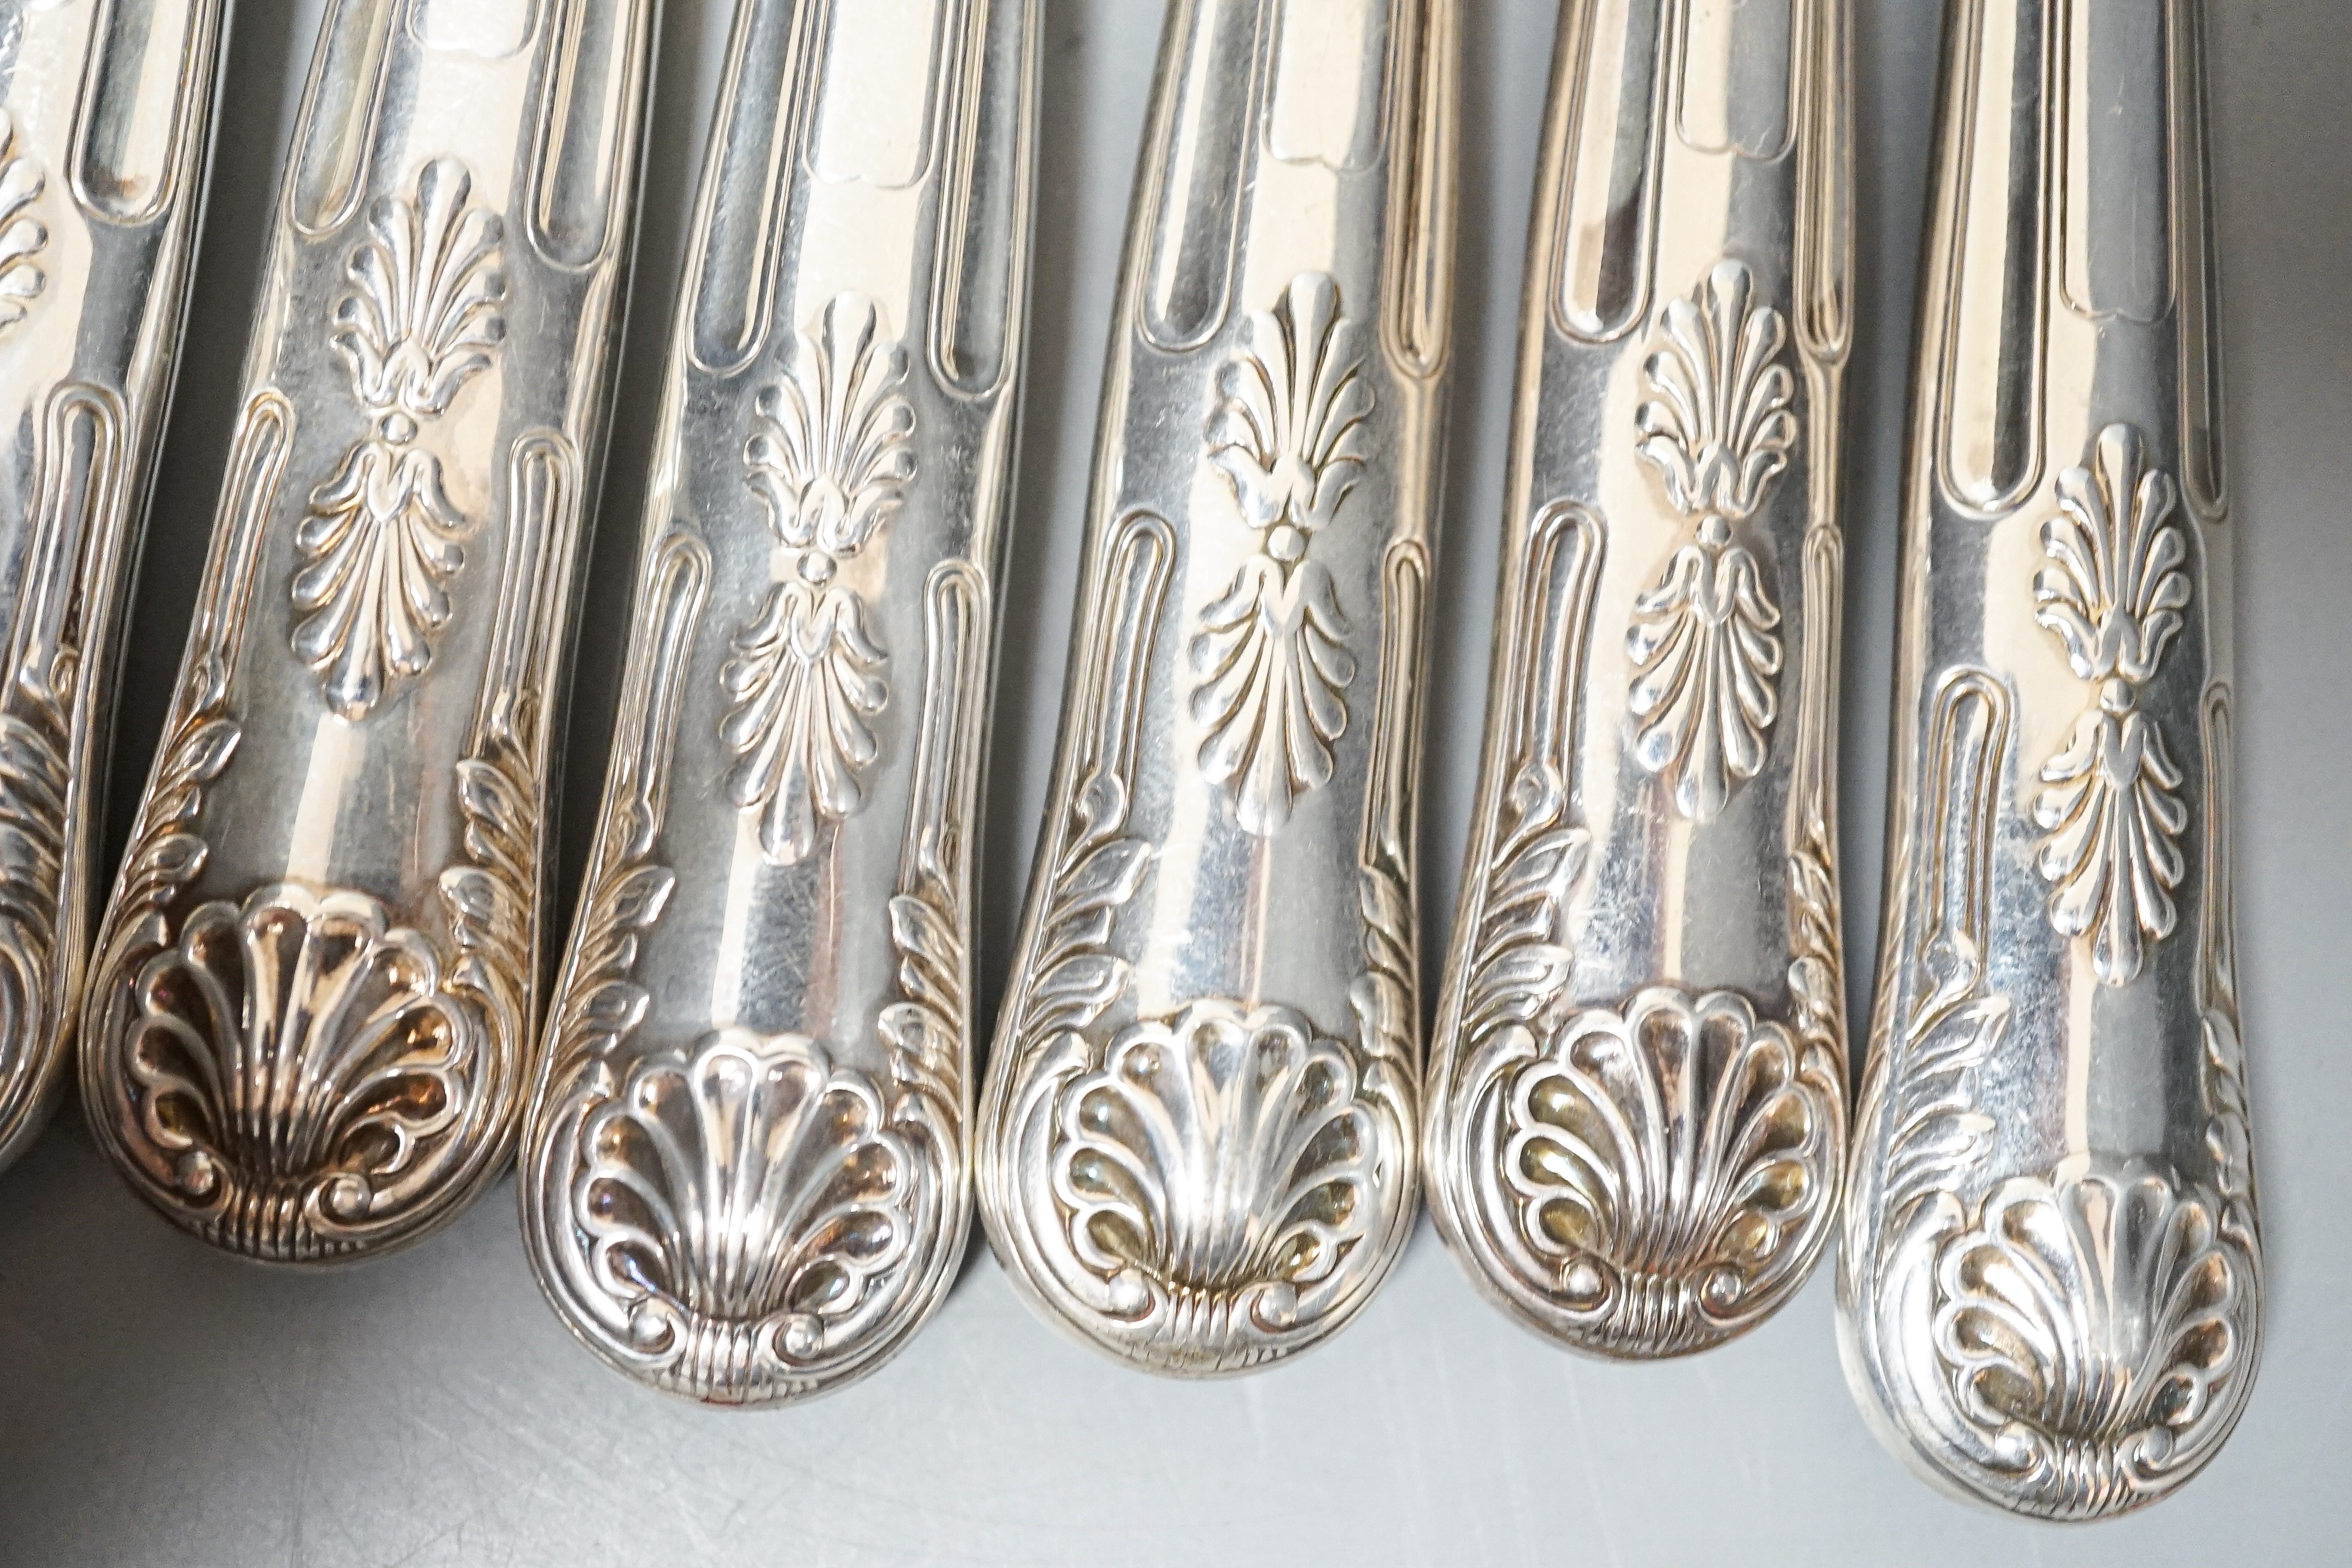 A set of six modern silver handled steel Kings pattern table knives and six matching dessert knives, A. Haviland Nye, Sheffield, 1973.